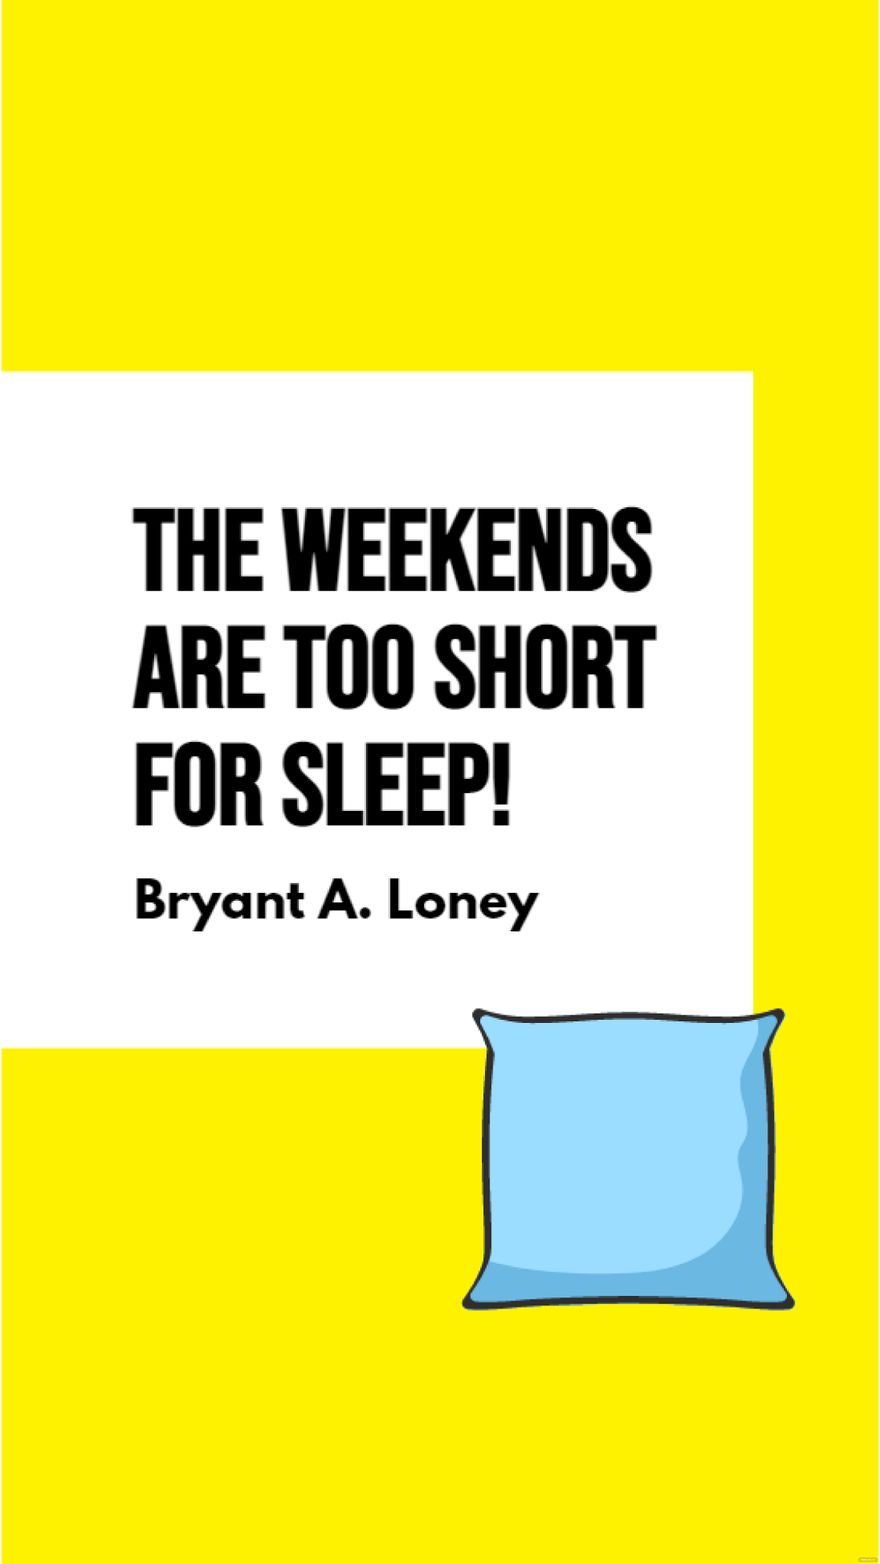 Bryant A. Loney - The weekends are too short for sleep! in JPG